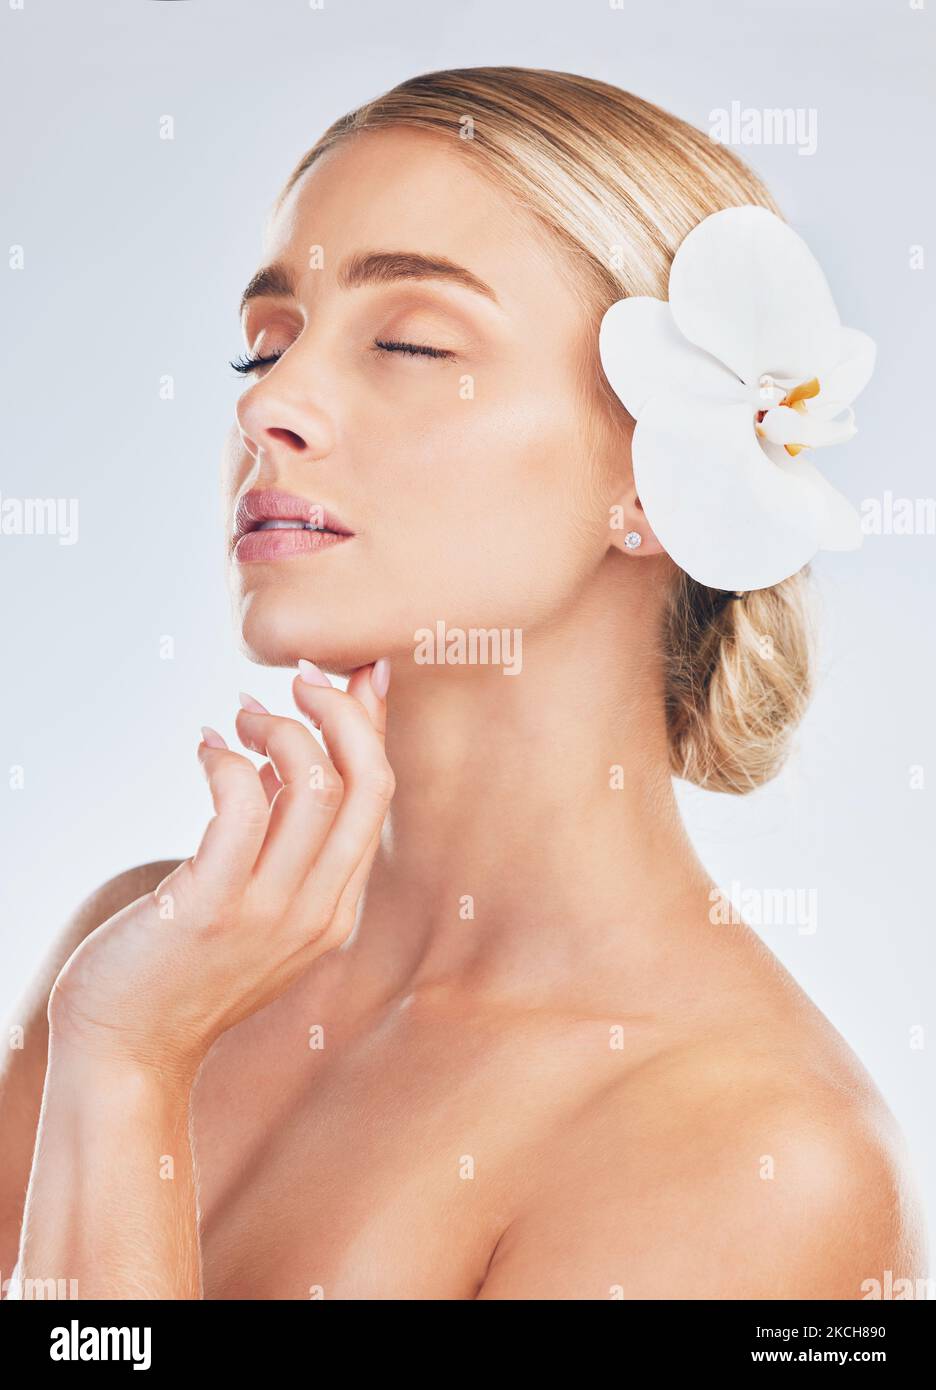 Skincare, wellness and face of a woman with an orchid for health, beauty and dermatology against a grey studio background. Spa, flower and girl model Stock Photo